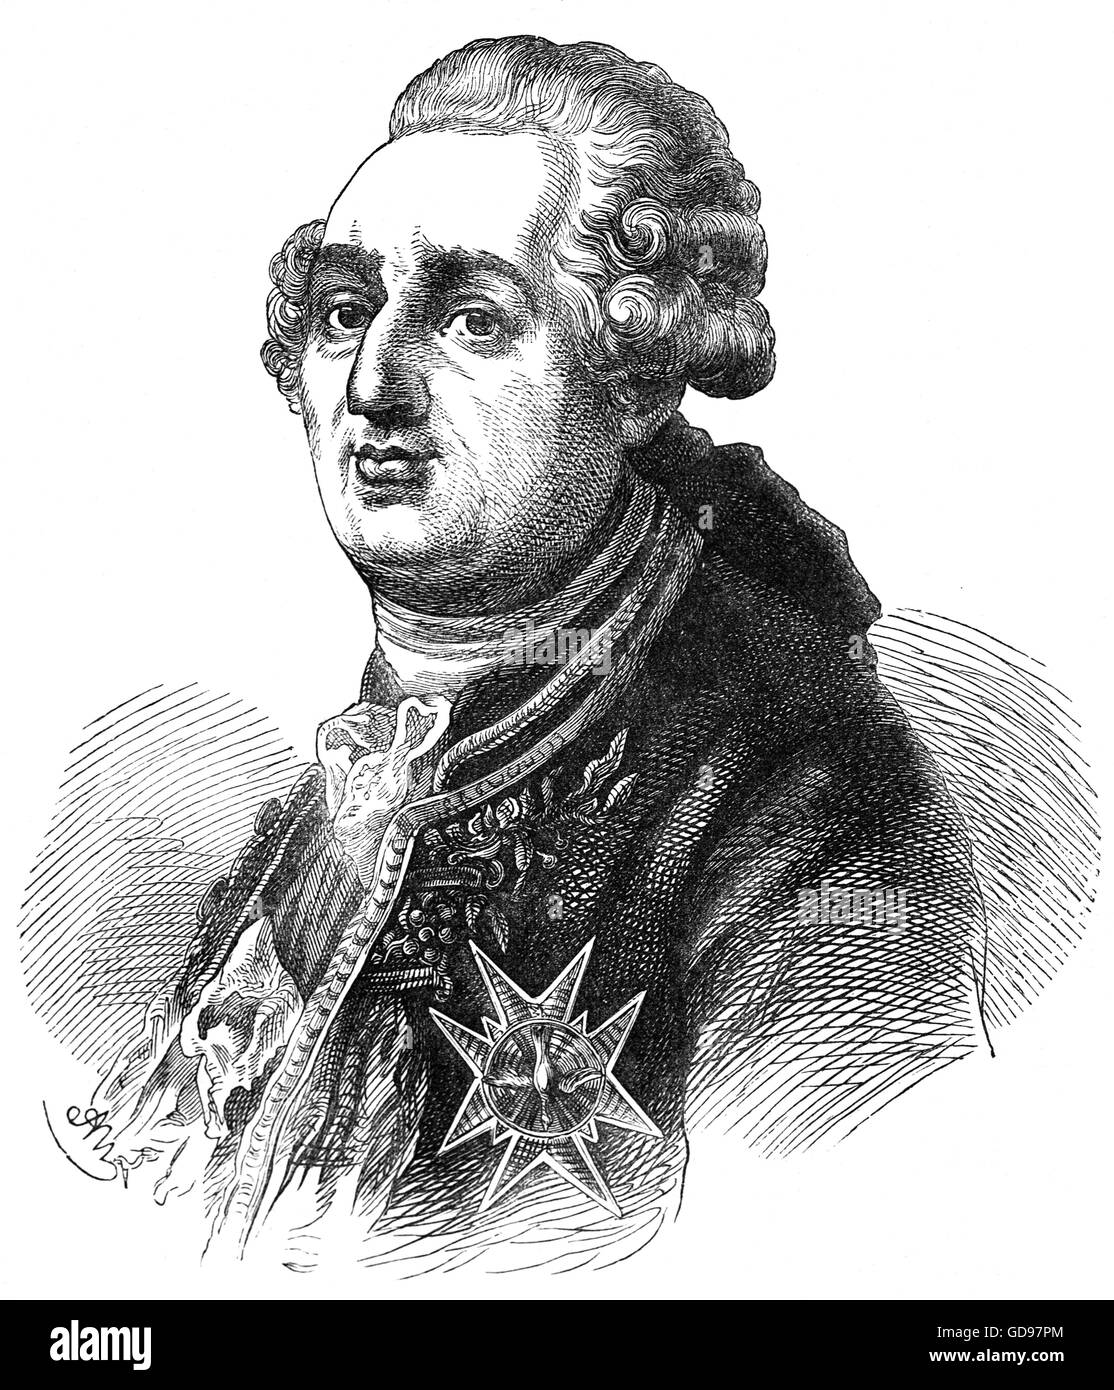 Louis XVI (1754 – 1793), born Louis-Auguste, also known as Louis Capet, was King of France from 1774 until his deposition in 1792, although his formal title after 1791 was King of the French. He was guillotined on 21 January 1793. Stock Photo